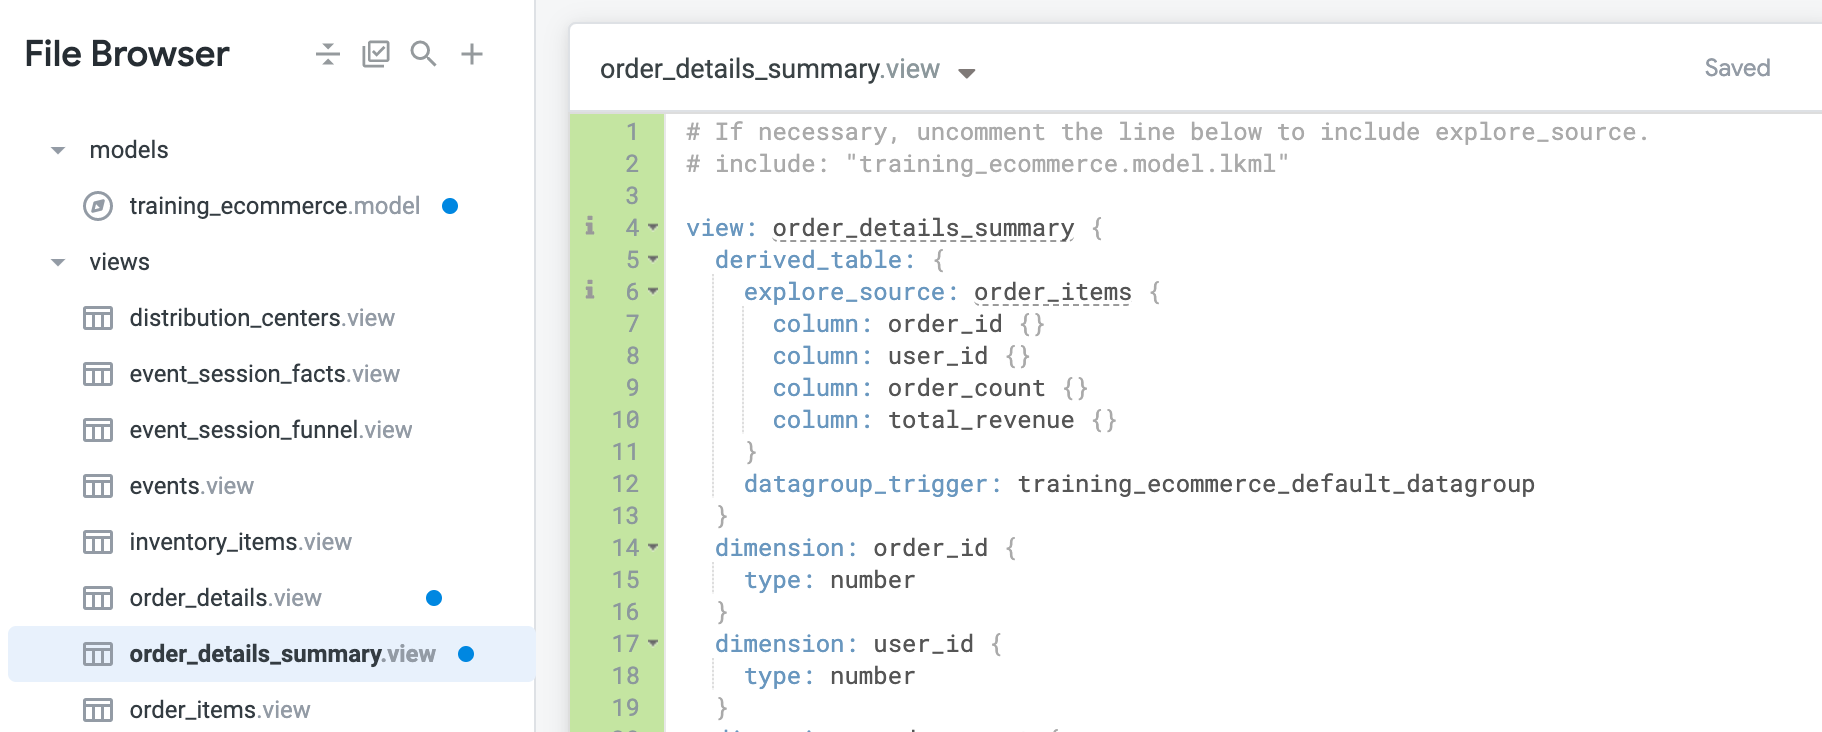 order_details_summary.view page